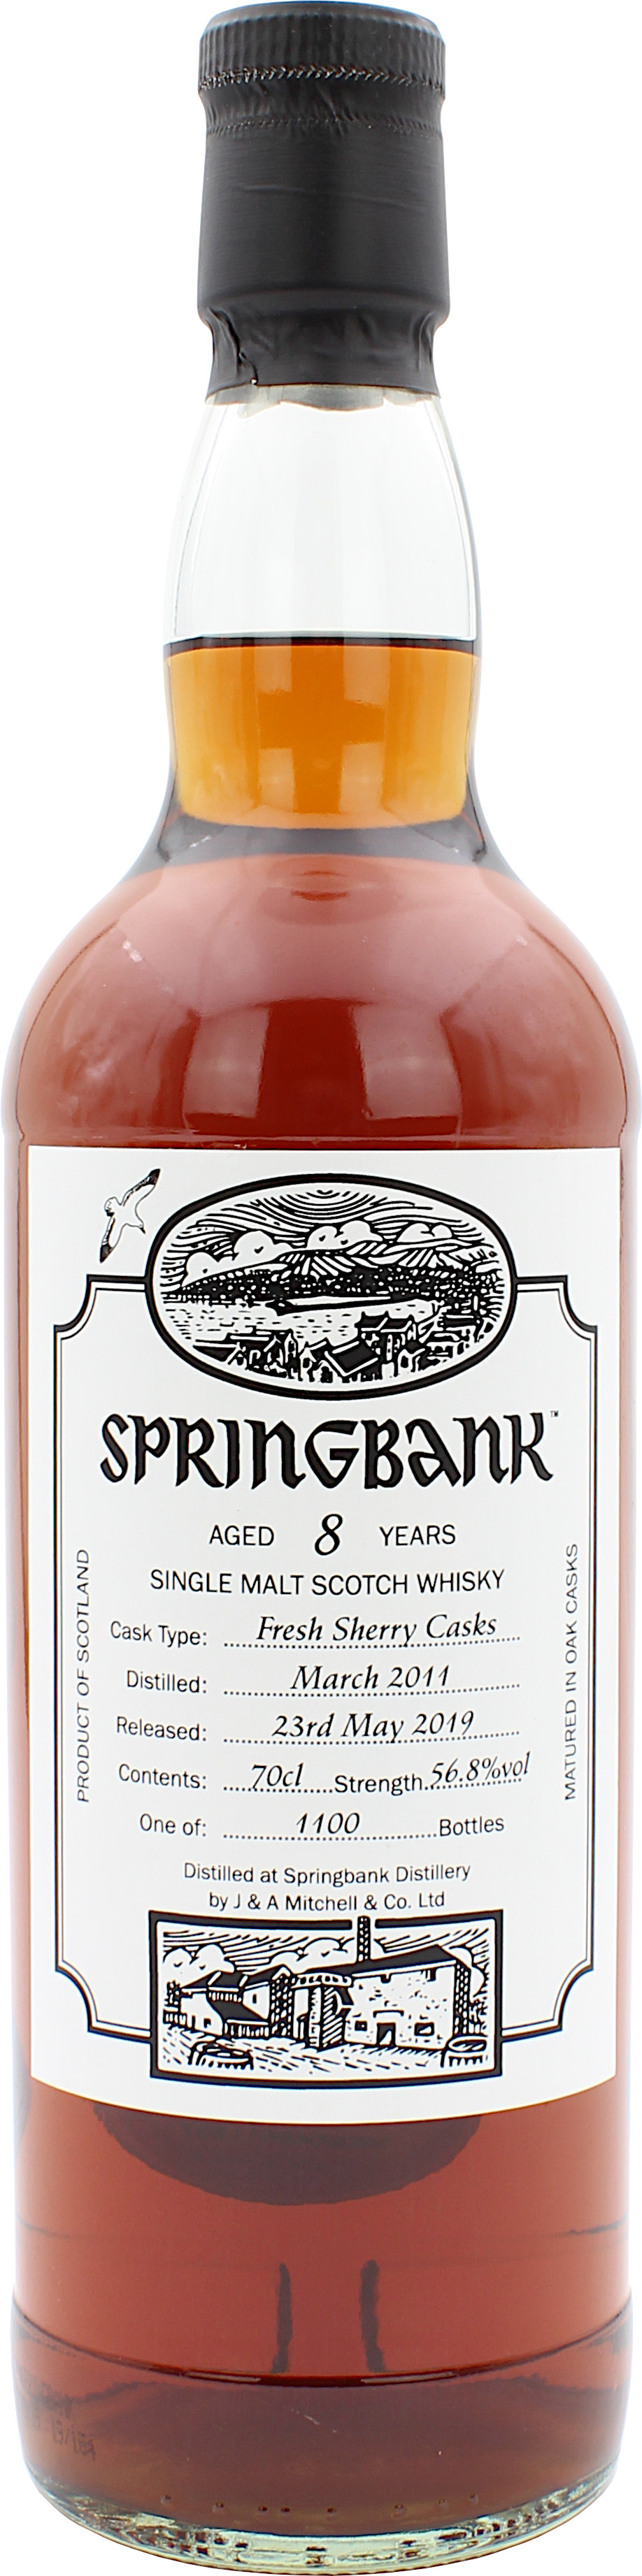 Springbank 8 Jahre 2011/2019 Open Day 2019 Sherry Cask 56.8% 0,7l